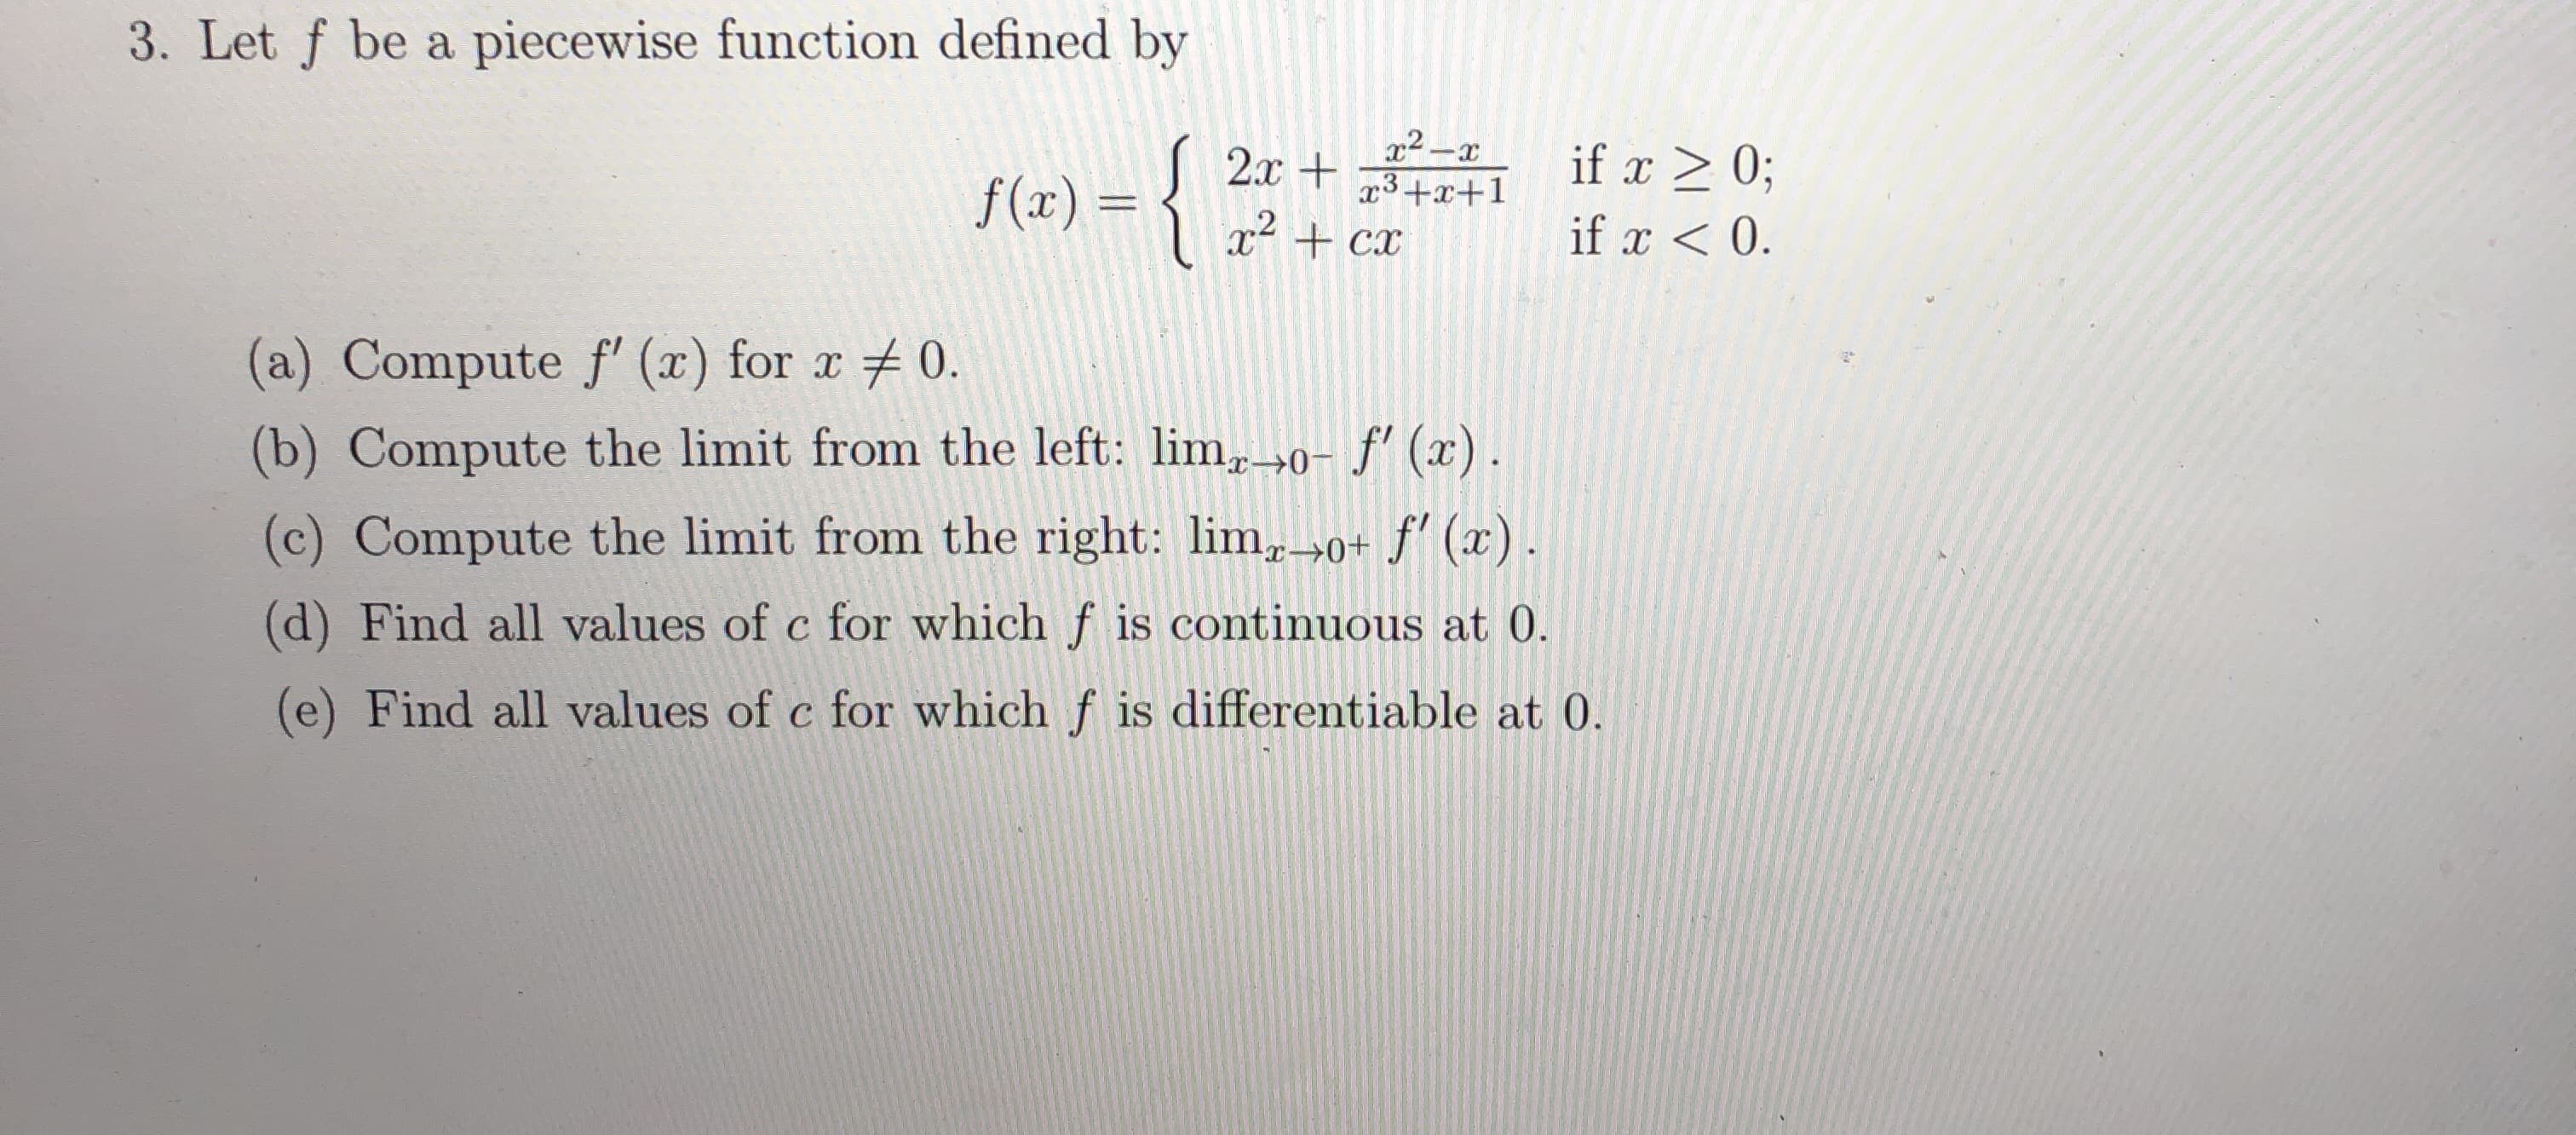 3. Let f be a piecewise function defined by
x2-x
x3+x+1
x² + cx
2.x + if > 0;
-{*:
f(x) = {
%3D
if x < 0.
(a) Compute f' (x) for x 0.
(b) Compute the limit from the left: lim,→0- f' (x).
(c) Compute the limit from the right: lim,»0+ f' (x).
(d) Find all values of c for which f is continuous at 0.
(e) Find all values of c for which f is differentiable at 0.
